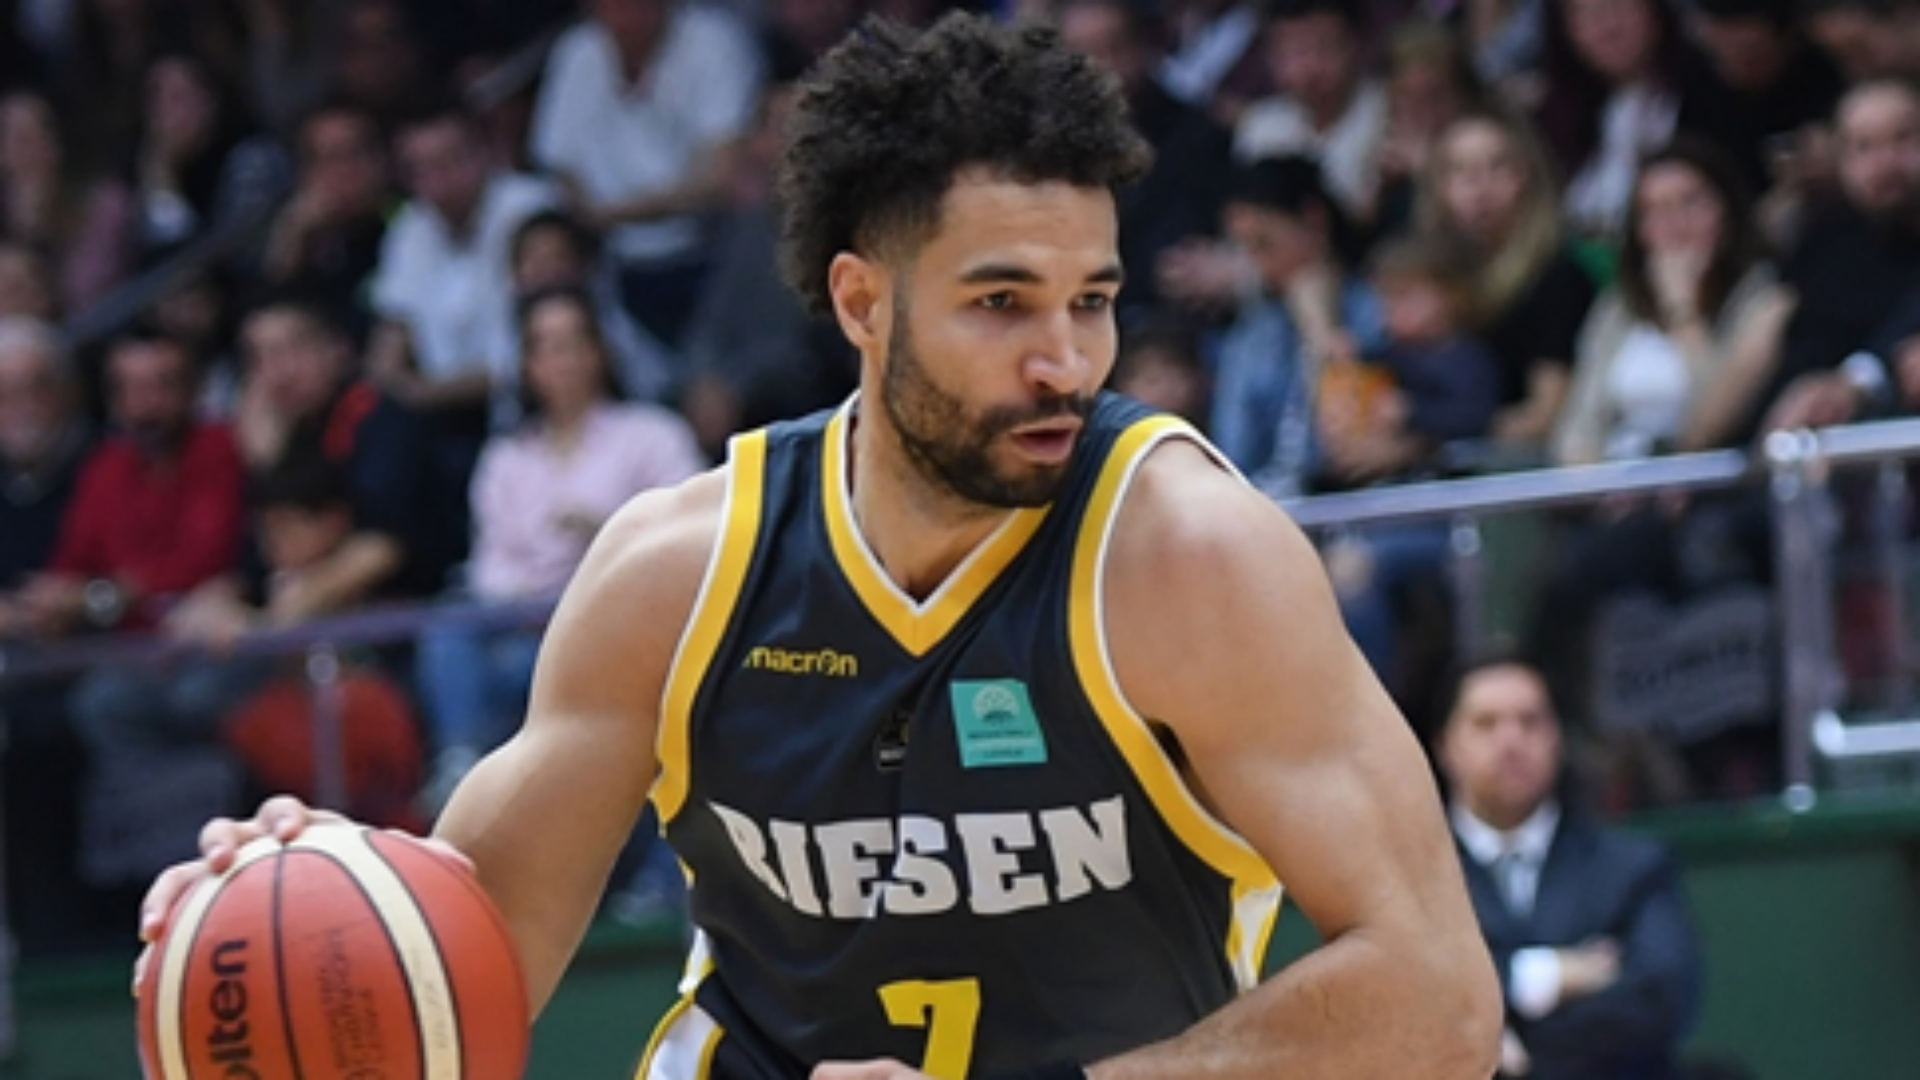 Ludwigsburg win on the road, ASVEL and Tenerife all square - sportal.co.nz